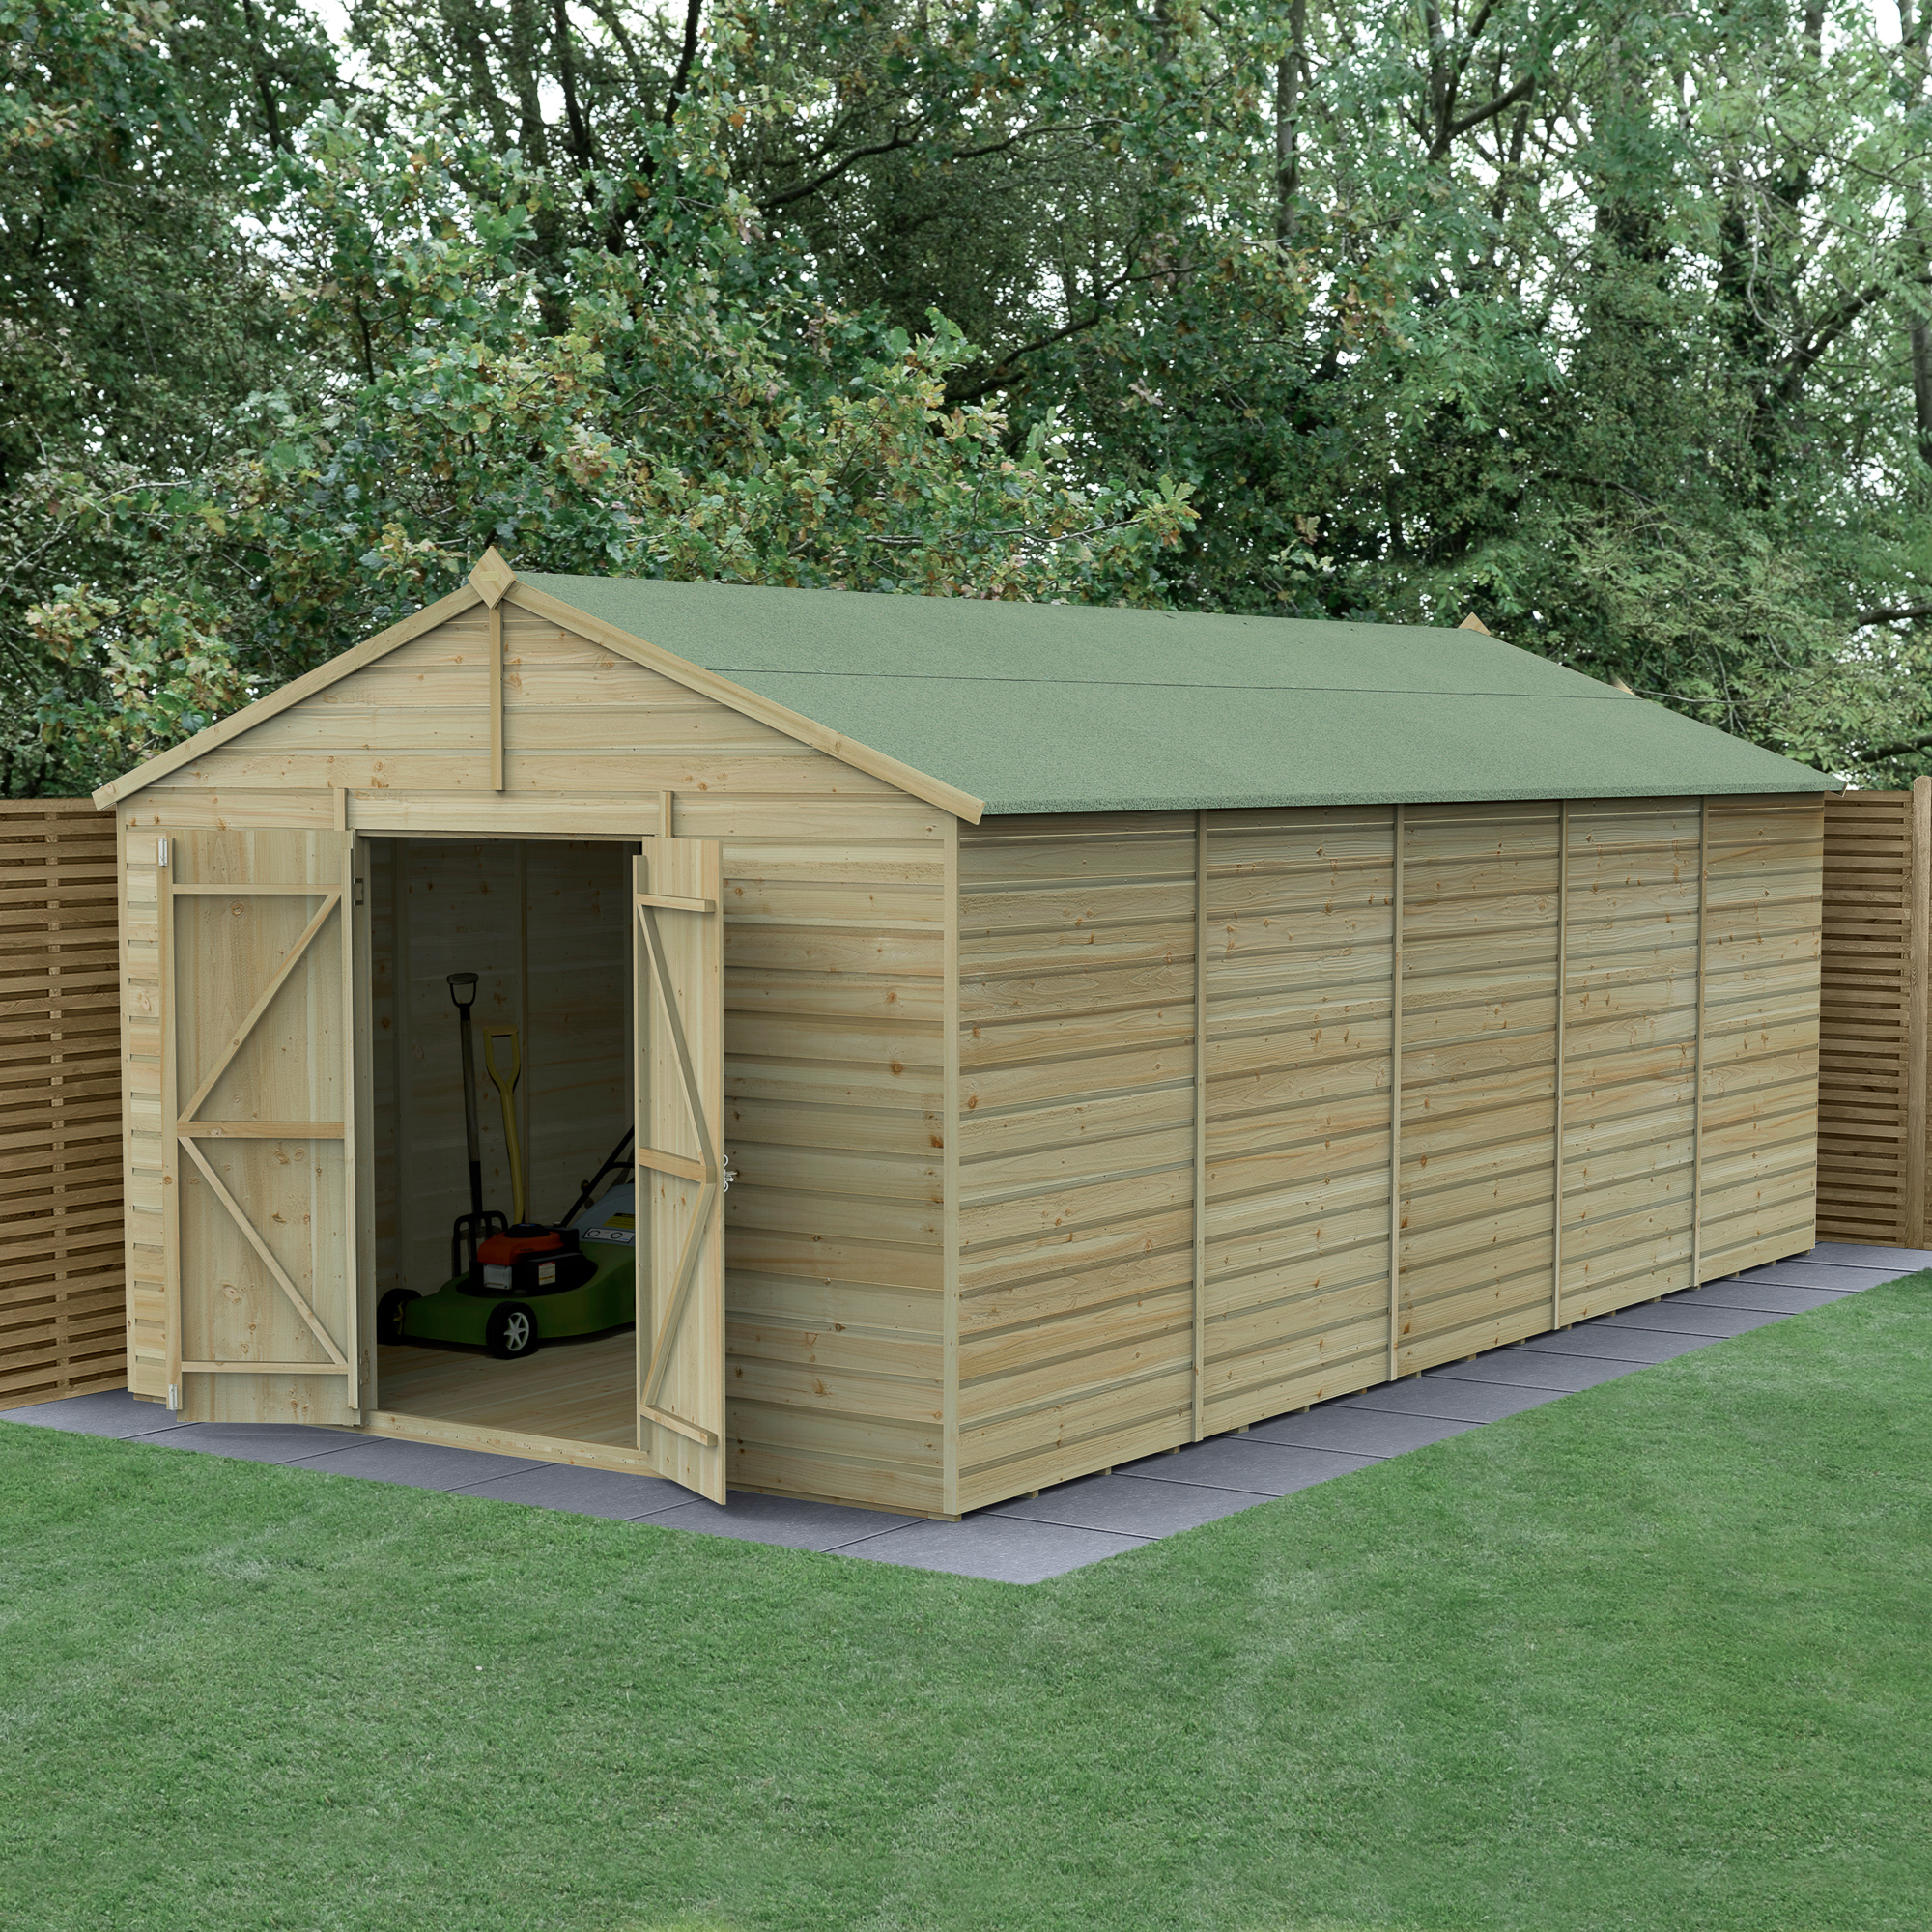 Forest Garden Beckwood 10 x 20ft Apex Shiplap Pressure Treated Double Door Windowless Shed with Base